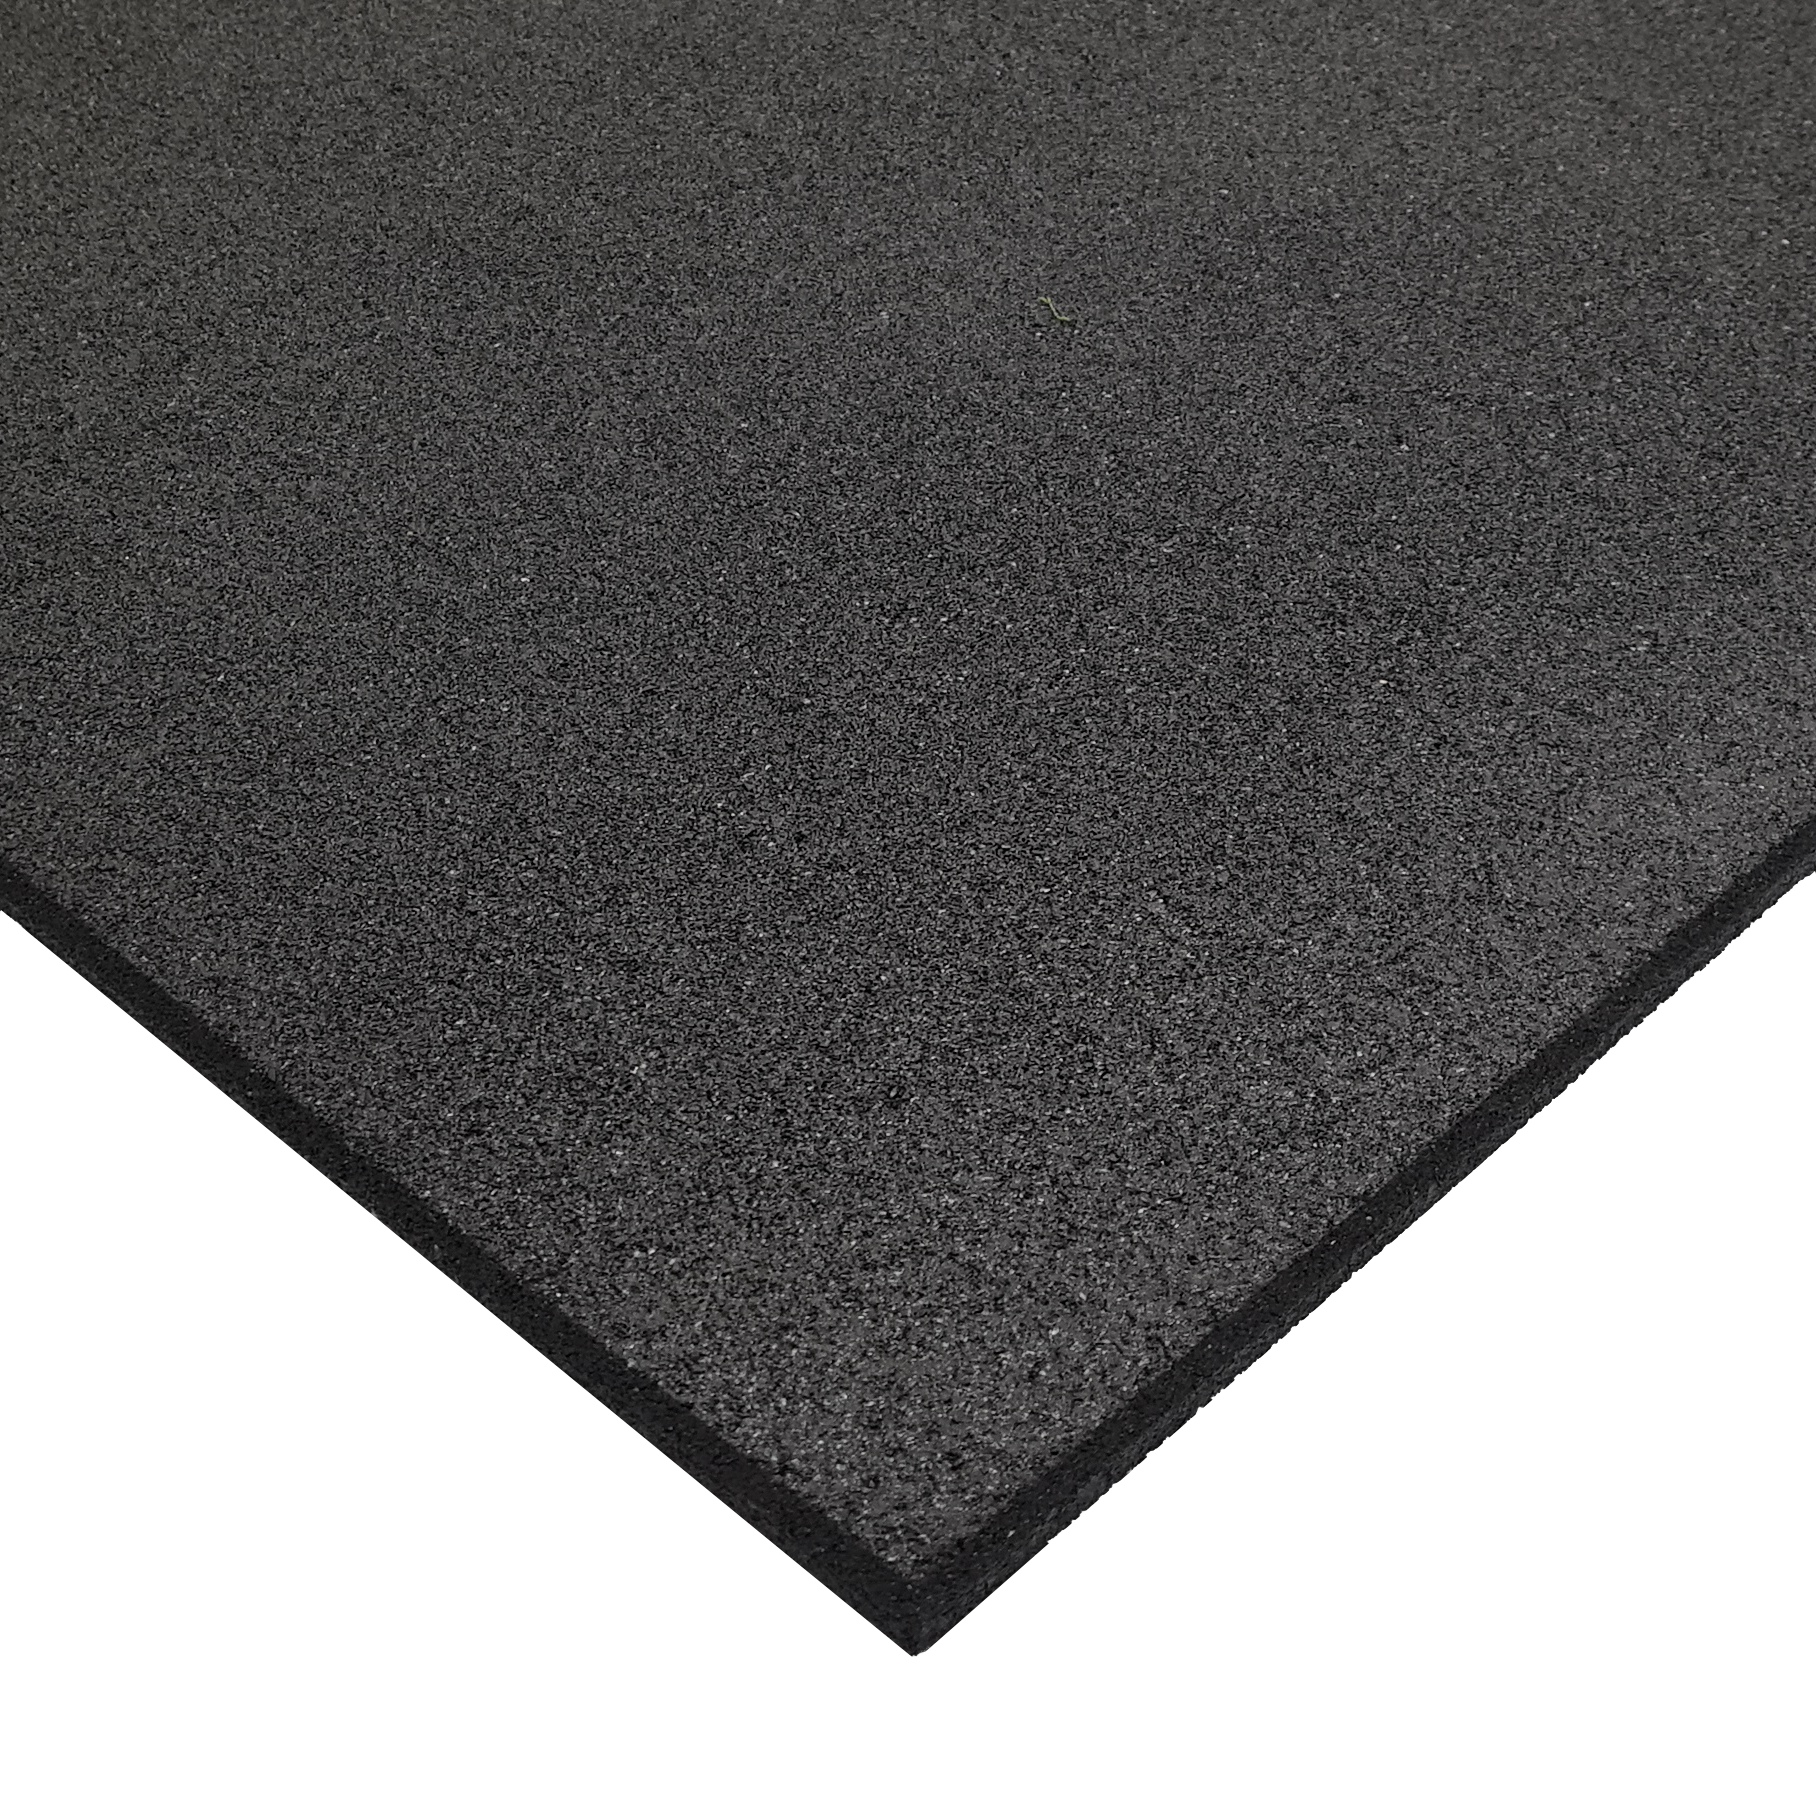 SuperStrong Gym Mats, 10mm – SuperStrong Fitness